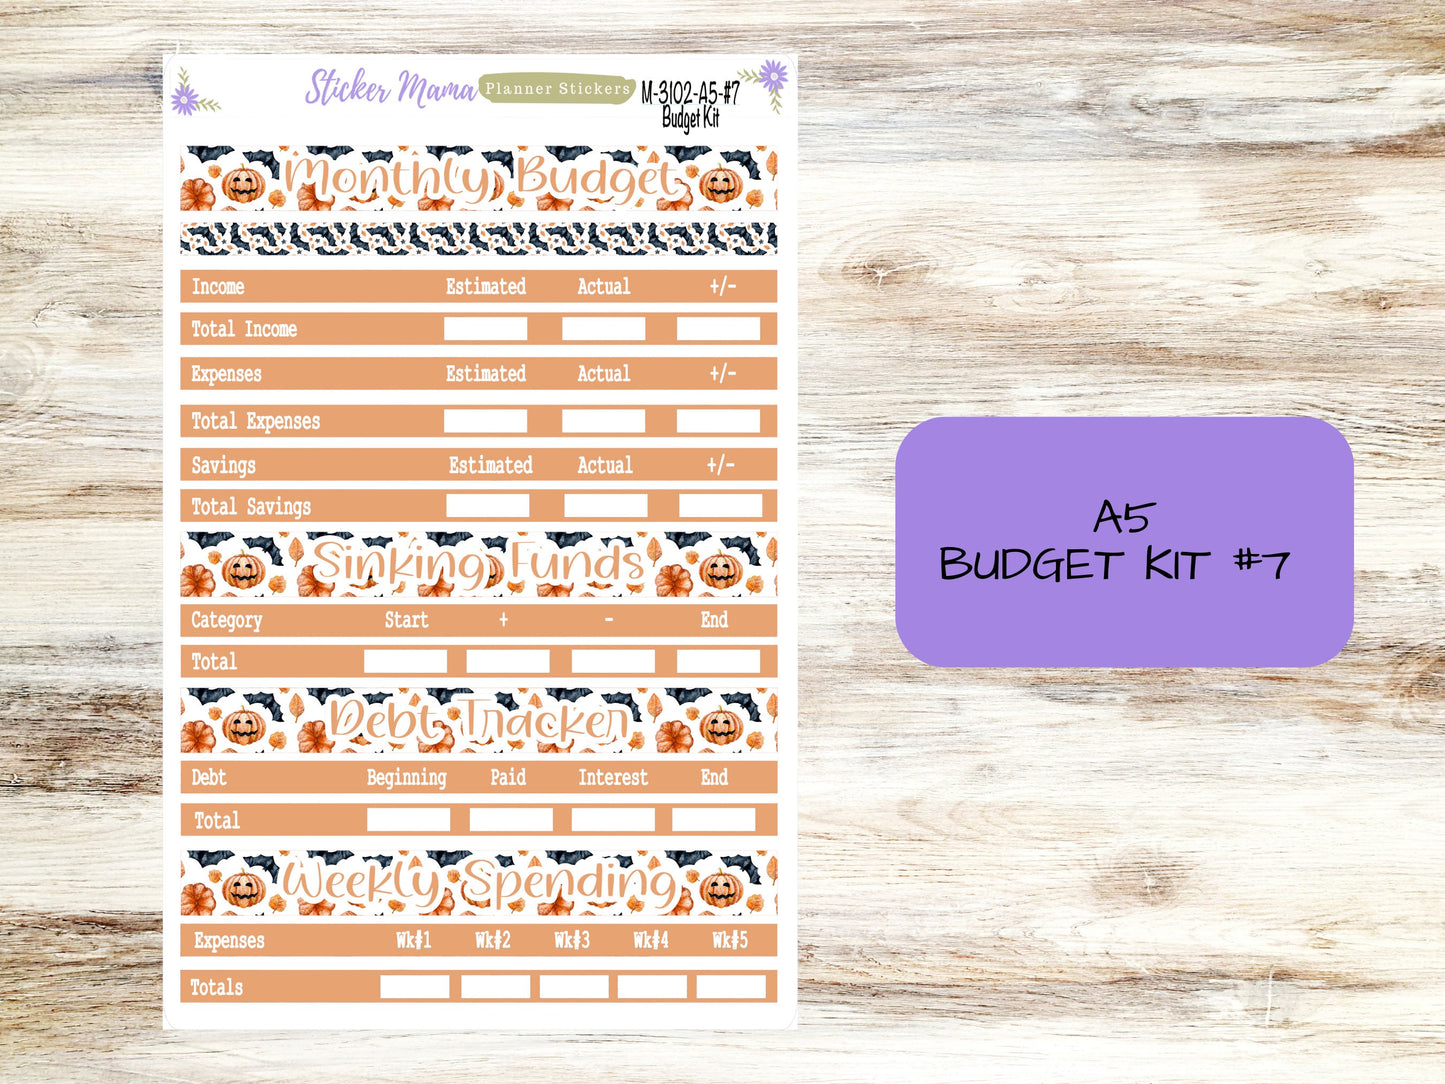 BUDGET - MONTH @ a GLANCE-3102 || A5 & 7x9 || Budget Sticker Kit || Notes Page Stickers || Planner Budget Kit